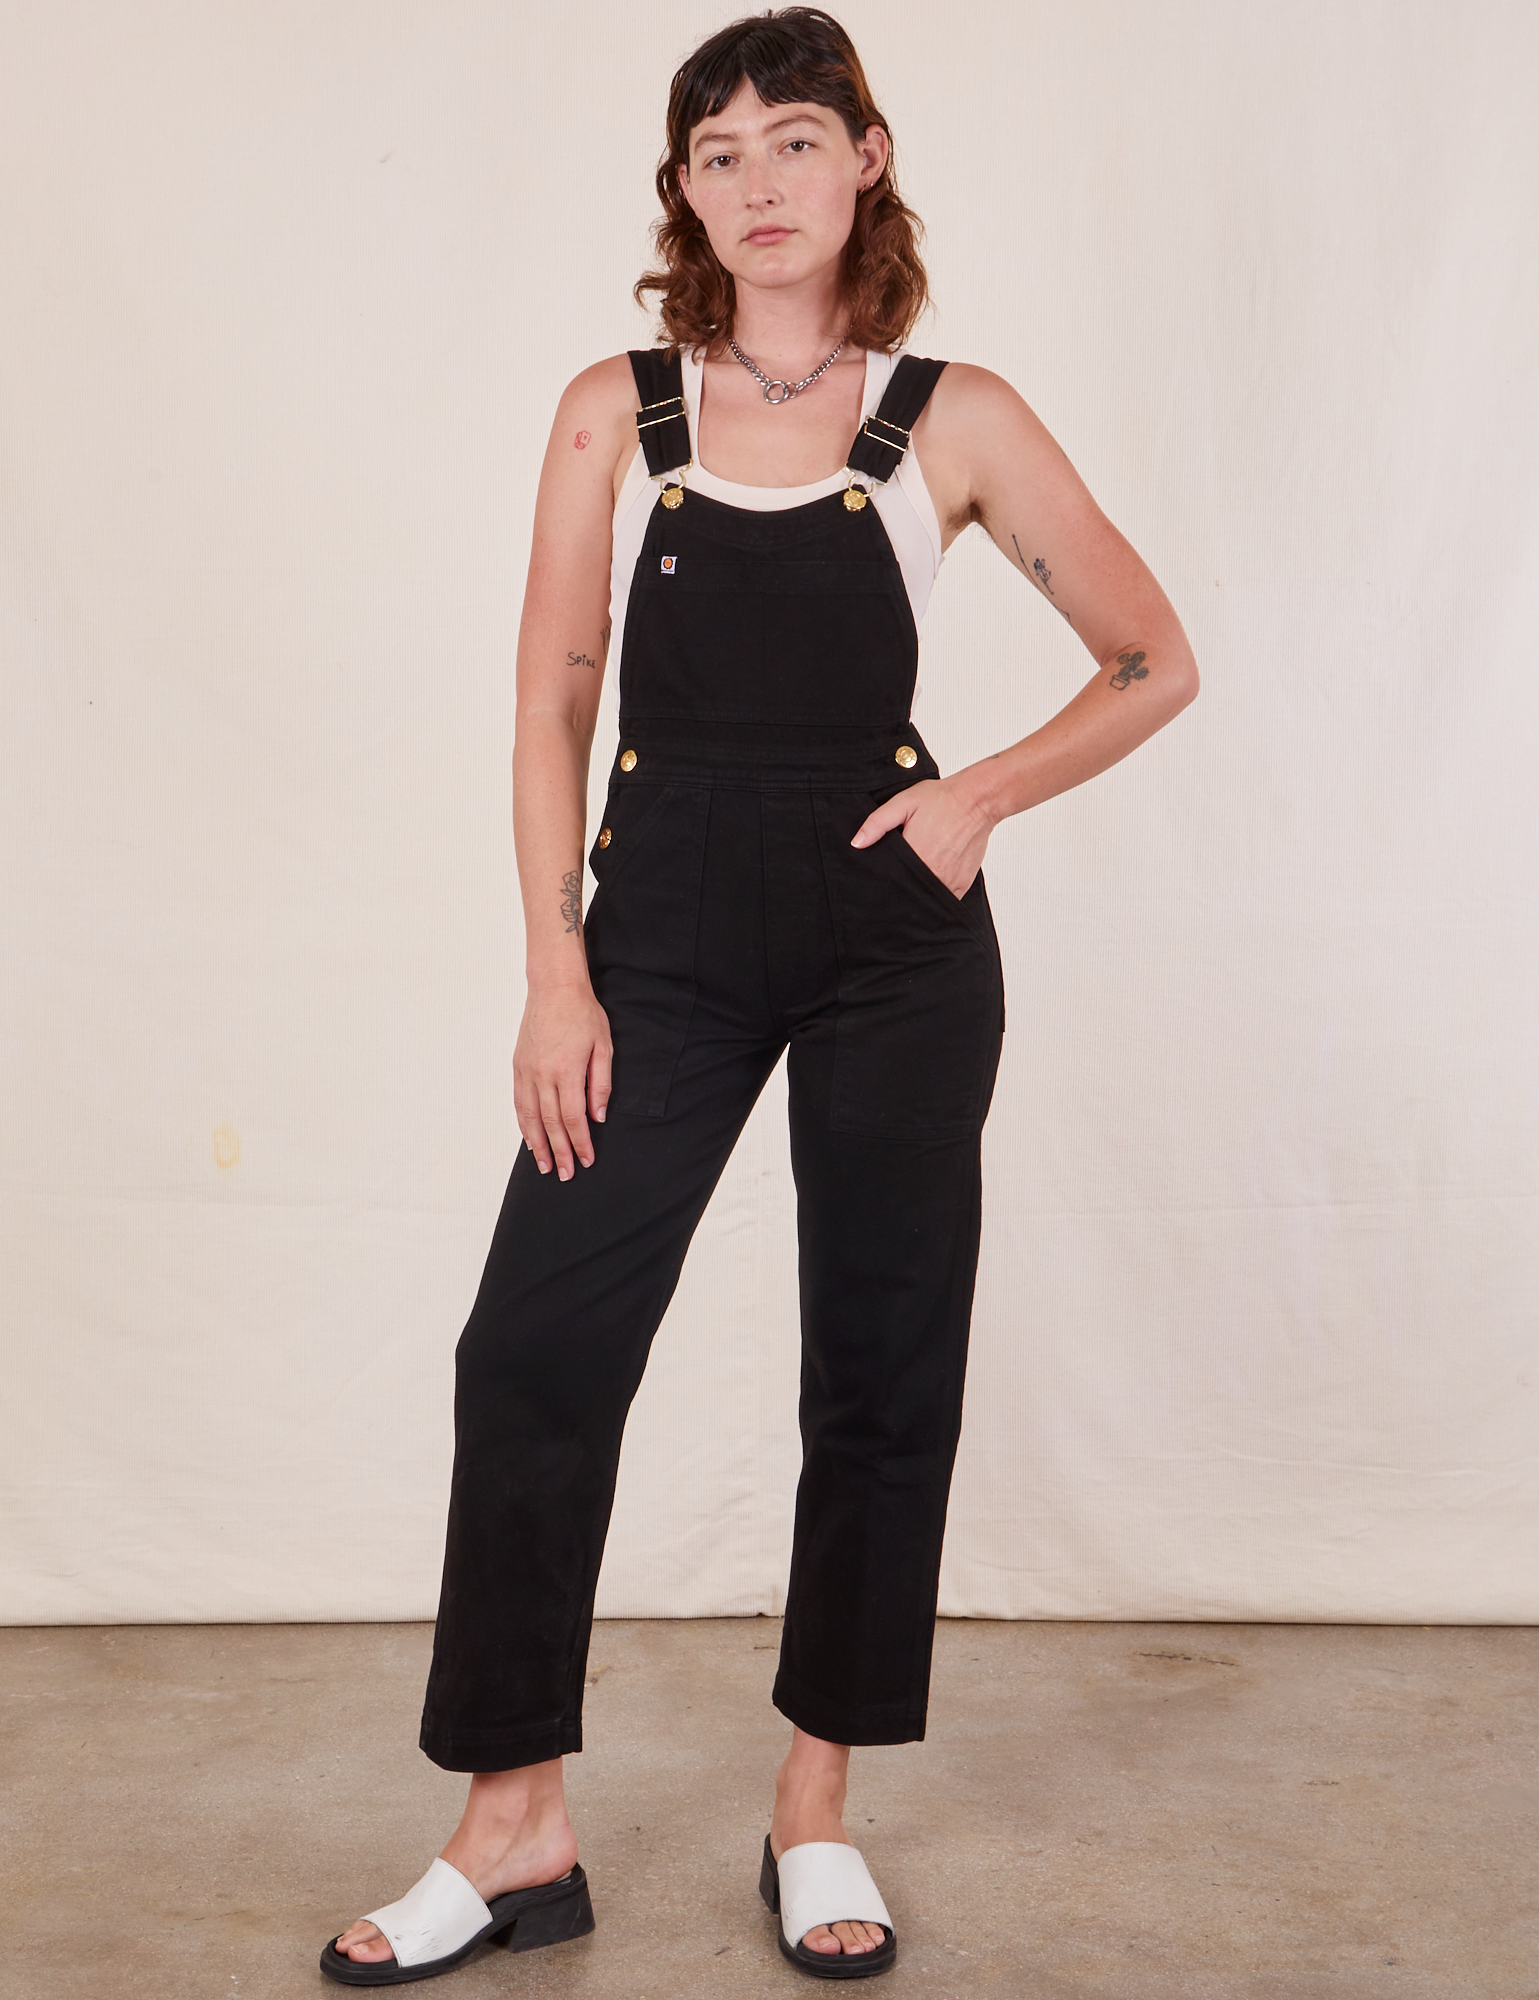 Alex is 5&#39;8&quot;and wearing size P Original Overalls in Mono Black